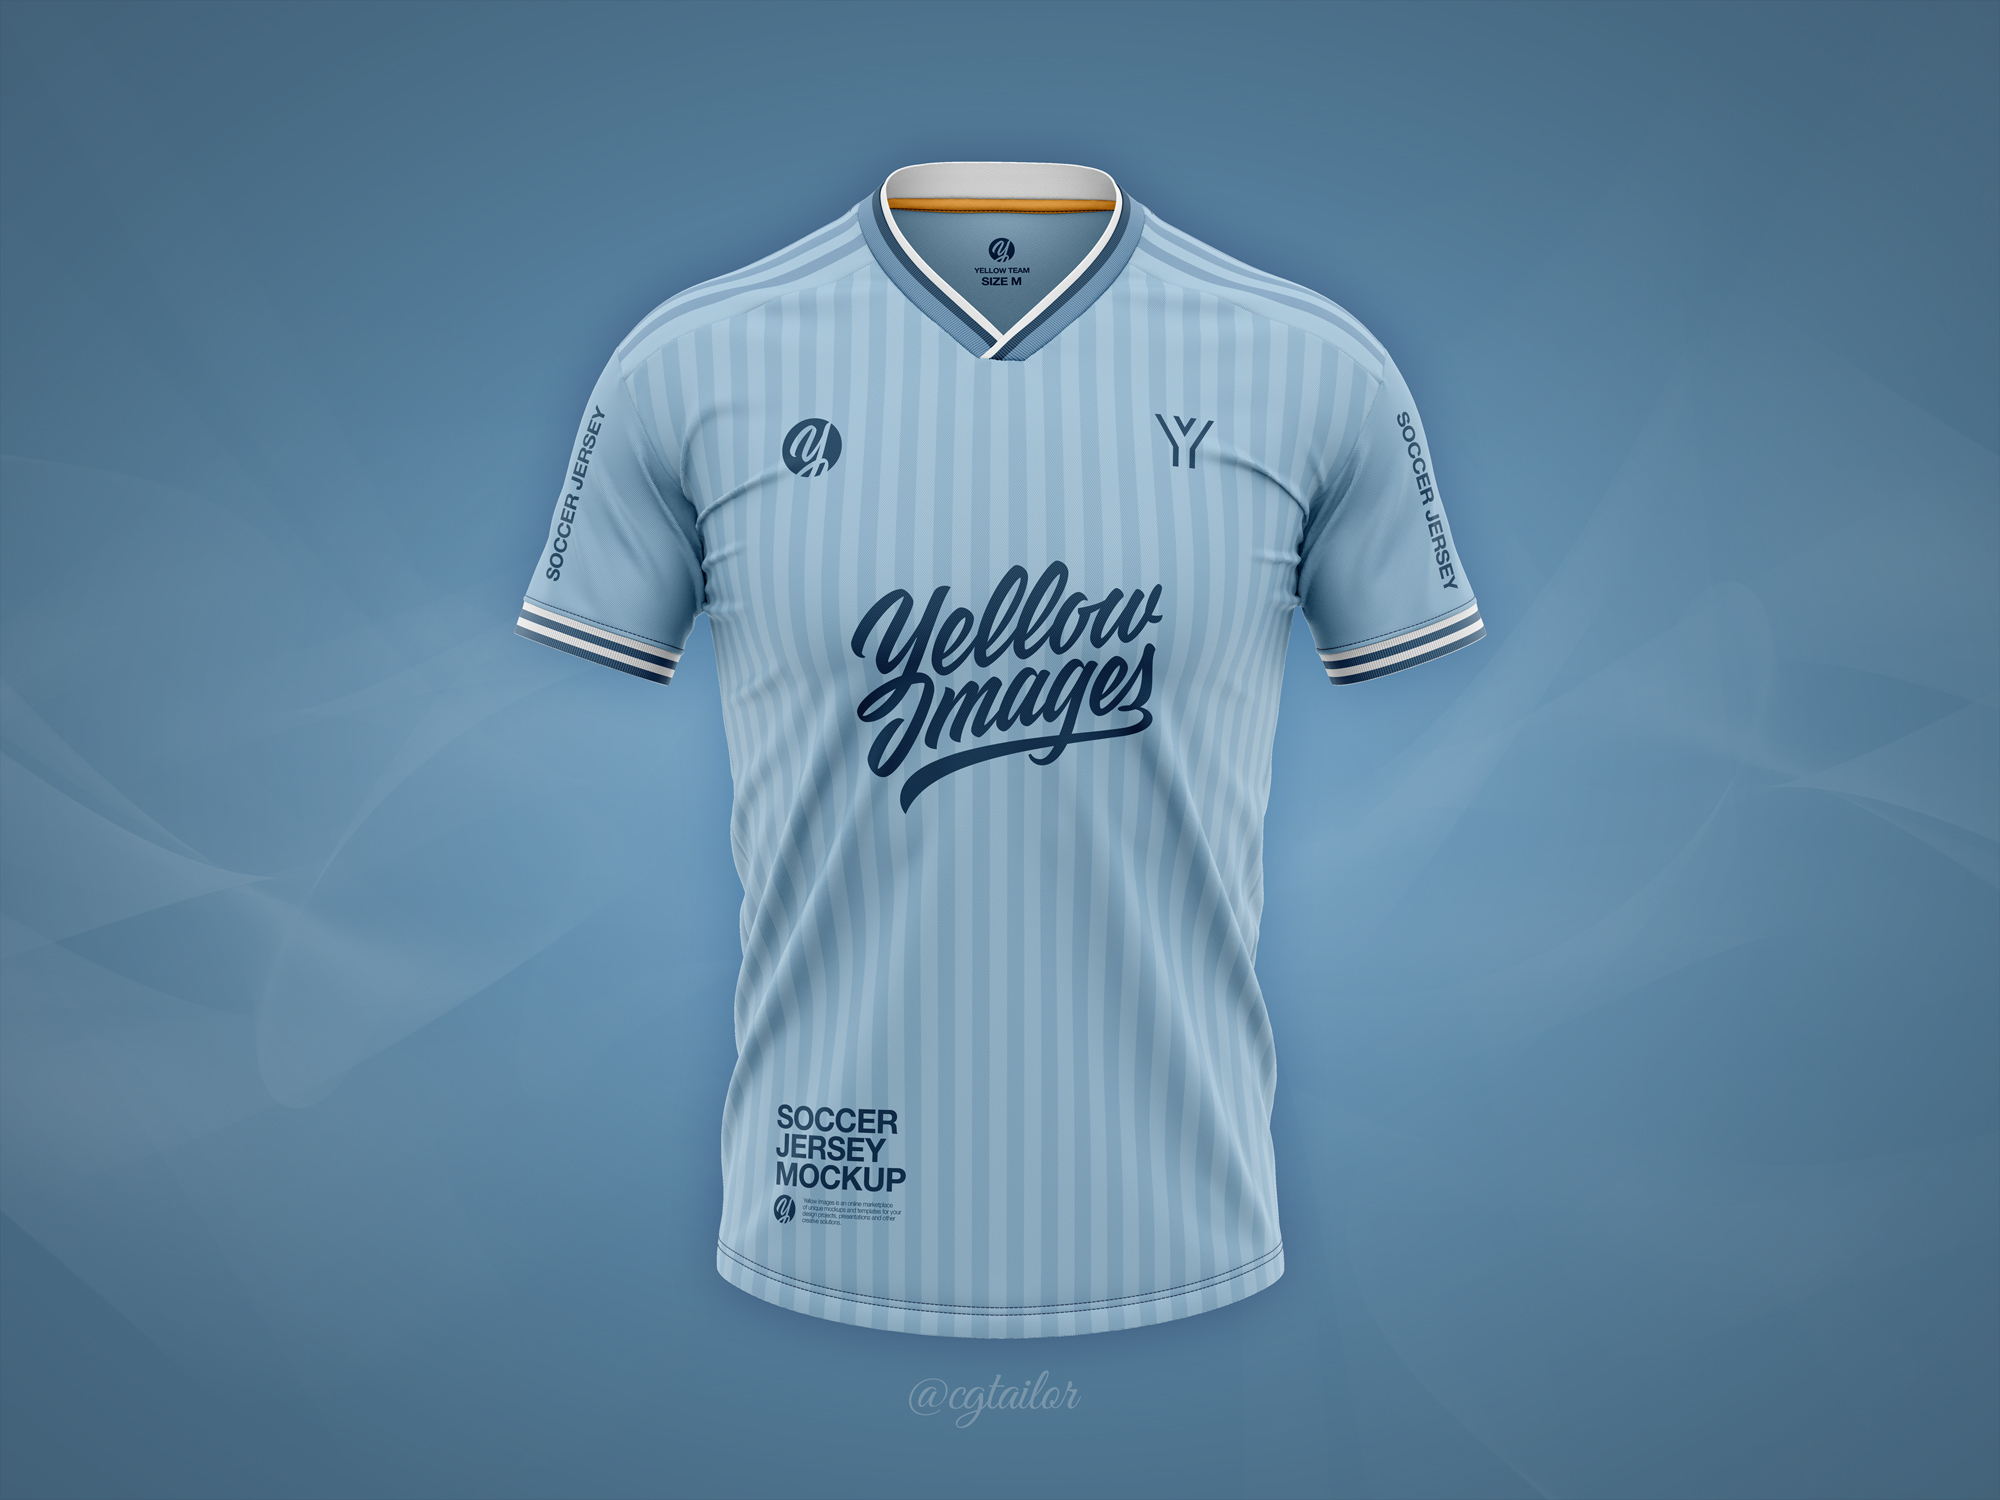 Download Football Jersey Mockup 2019 2020 Season By Cg Tailor On Dribbble Yellowimages Mockups